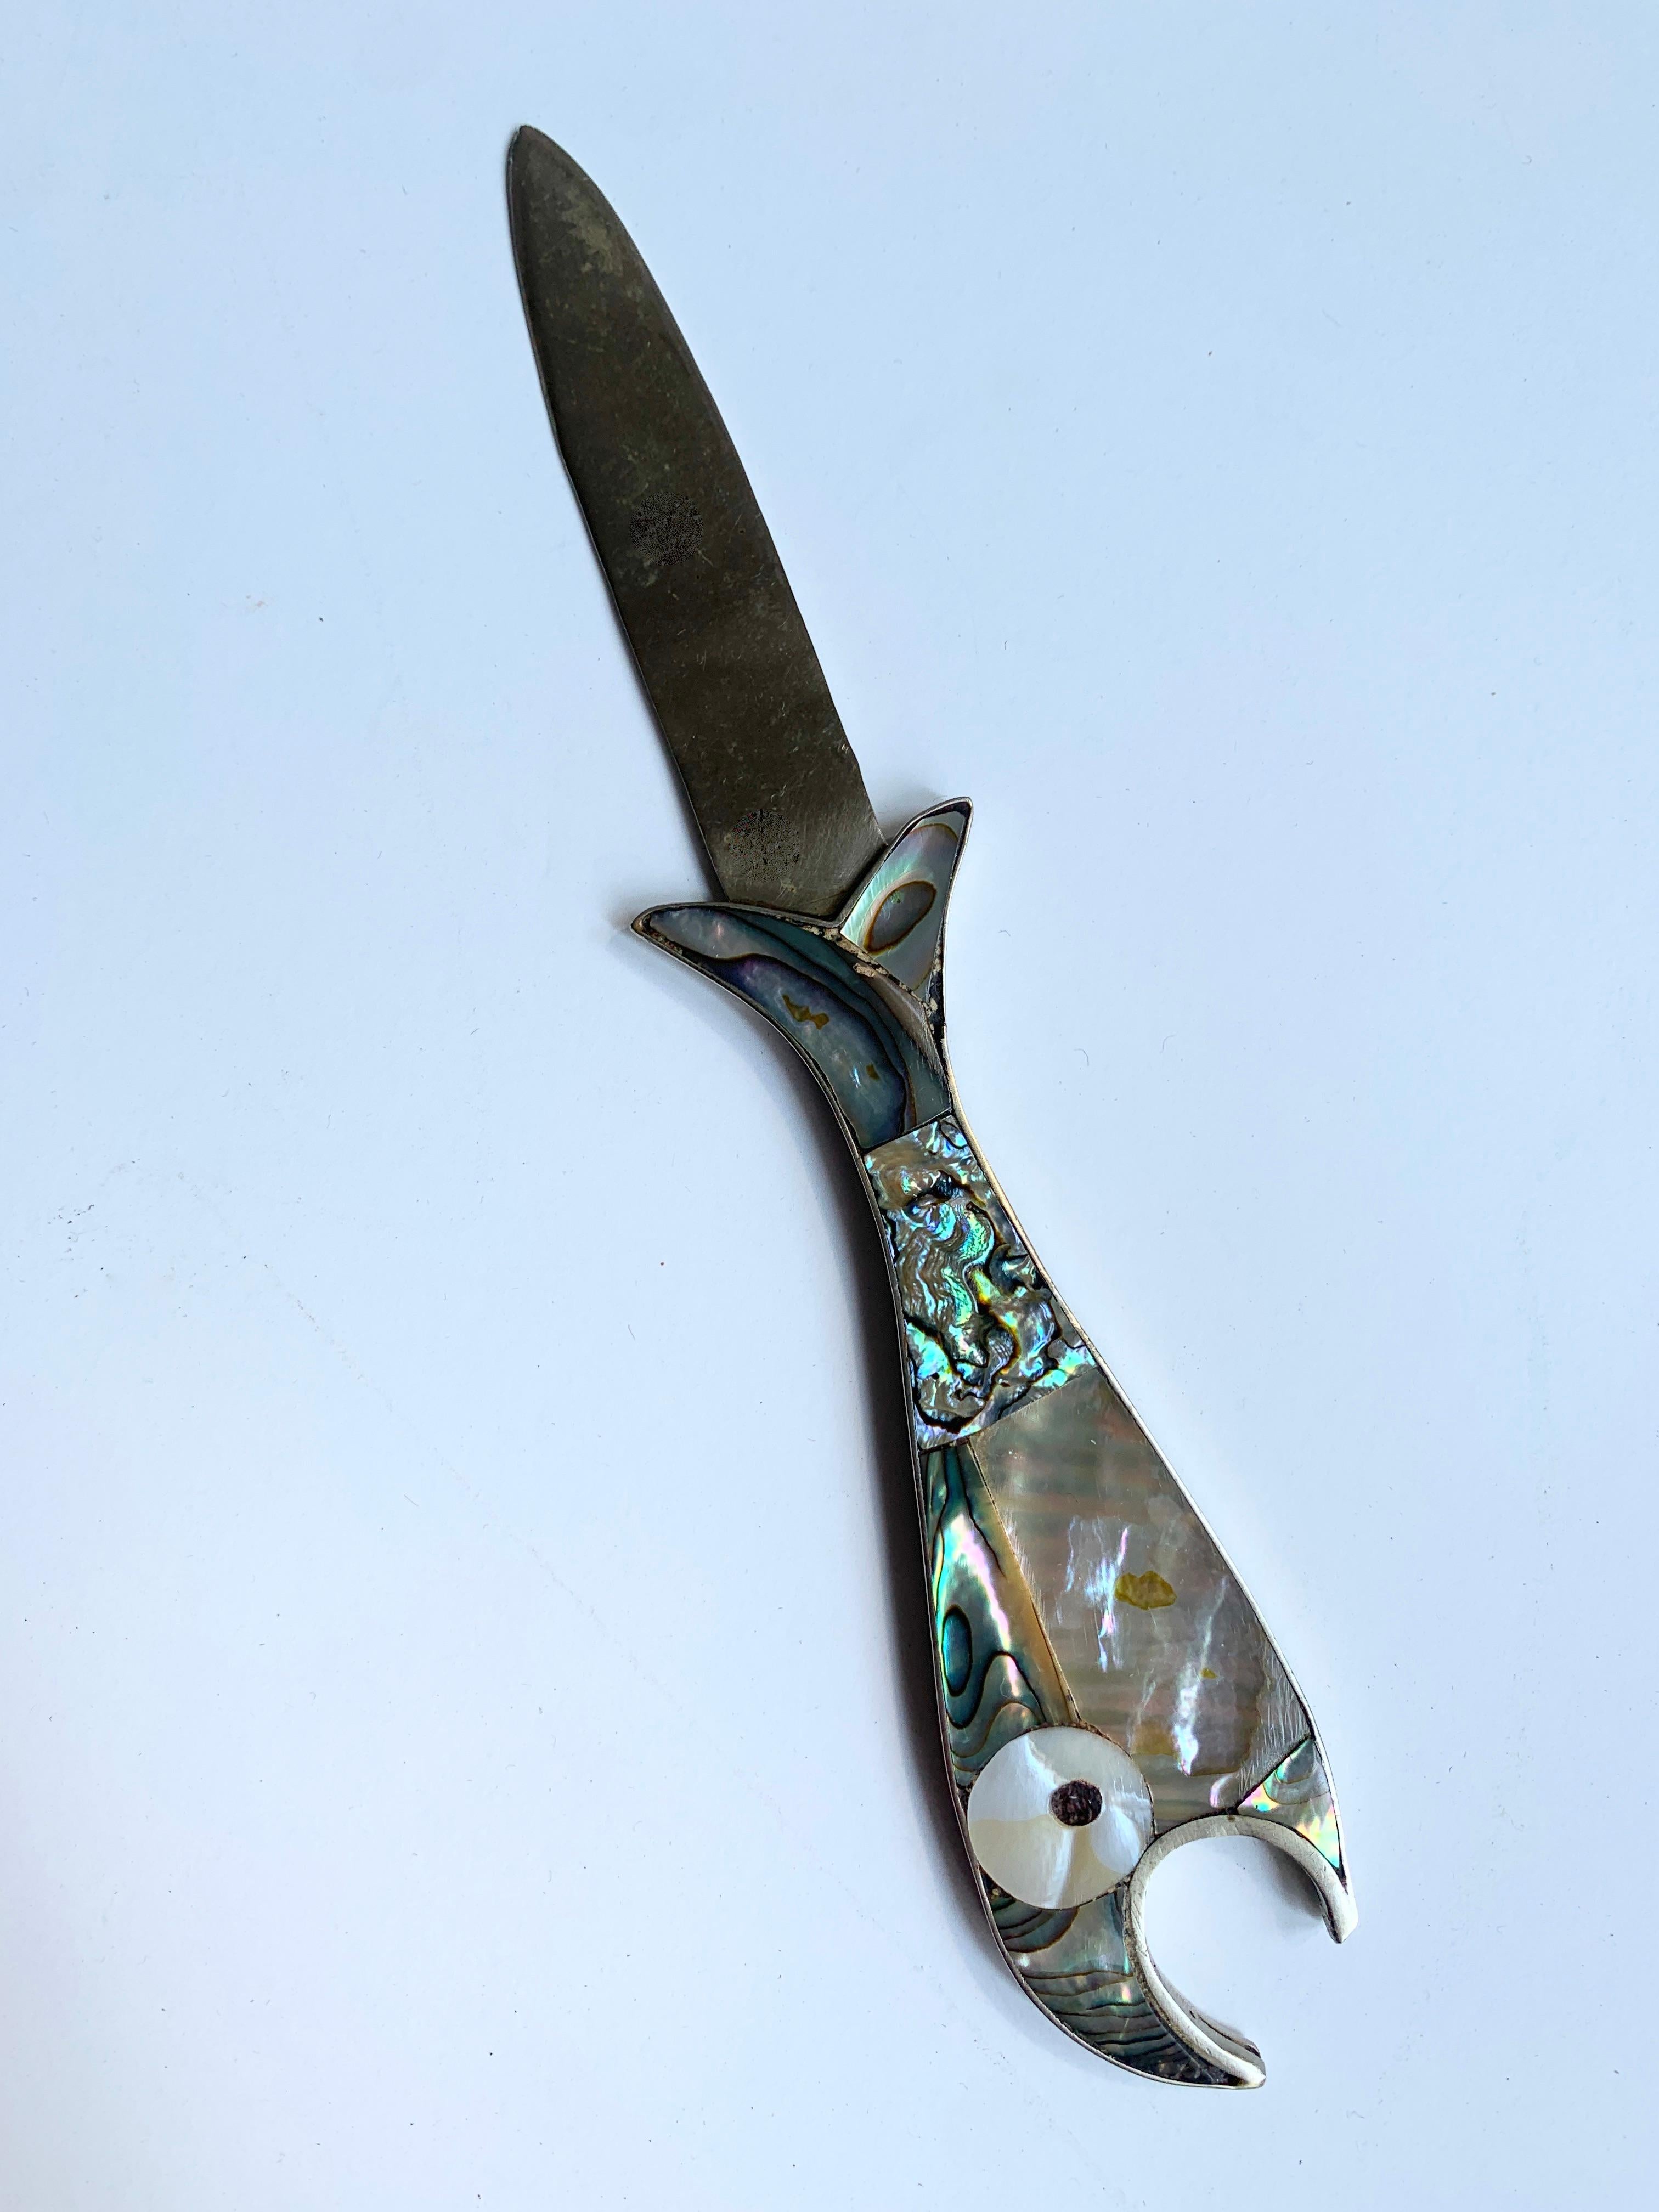 Abalone and silver fish bottle and letter opener - this says it all... Pop open a drink, open a letter and do it all in style! Handmade in Mexico of Alpaca Silver.

The letter opener portion is a random addition to the classic midcentury bottle